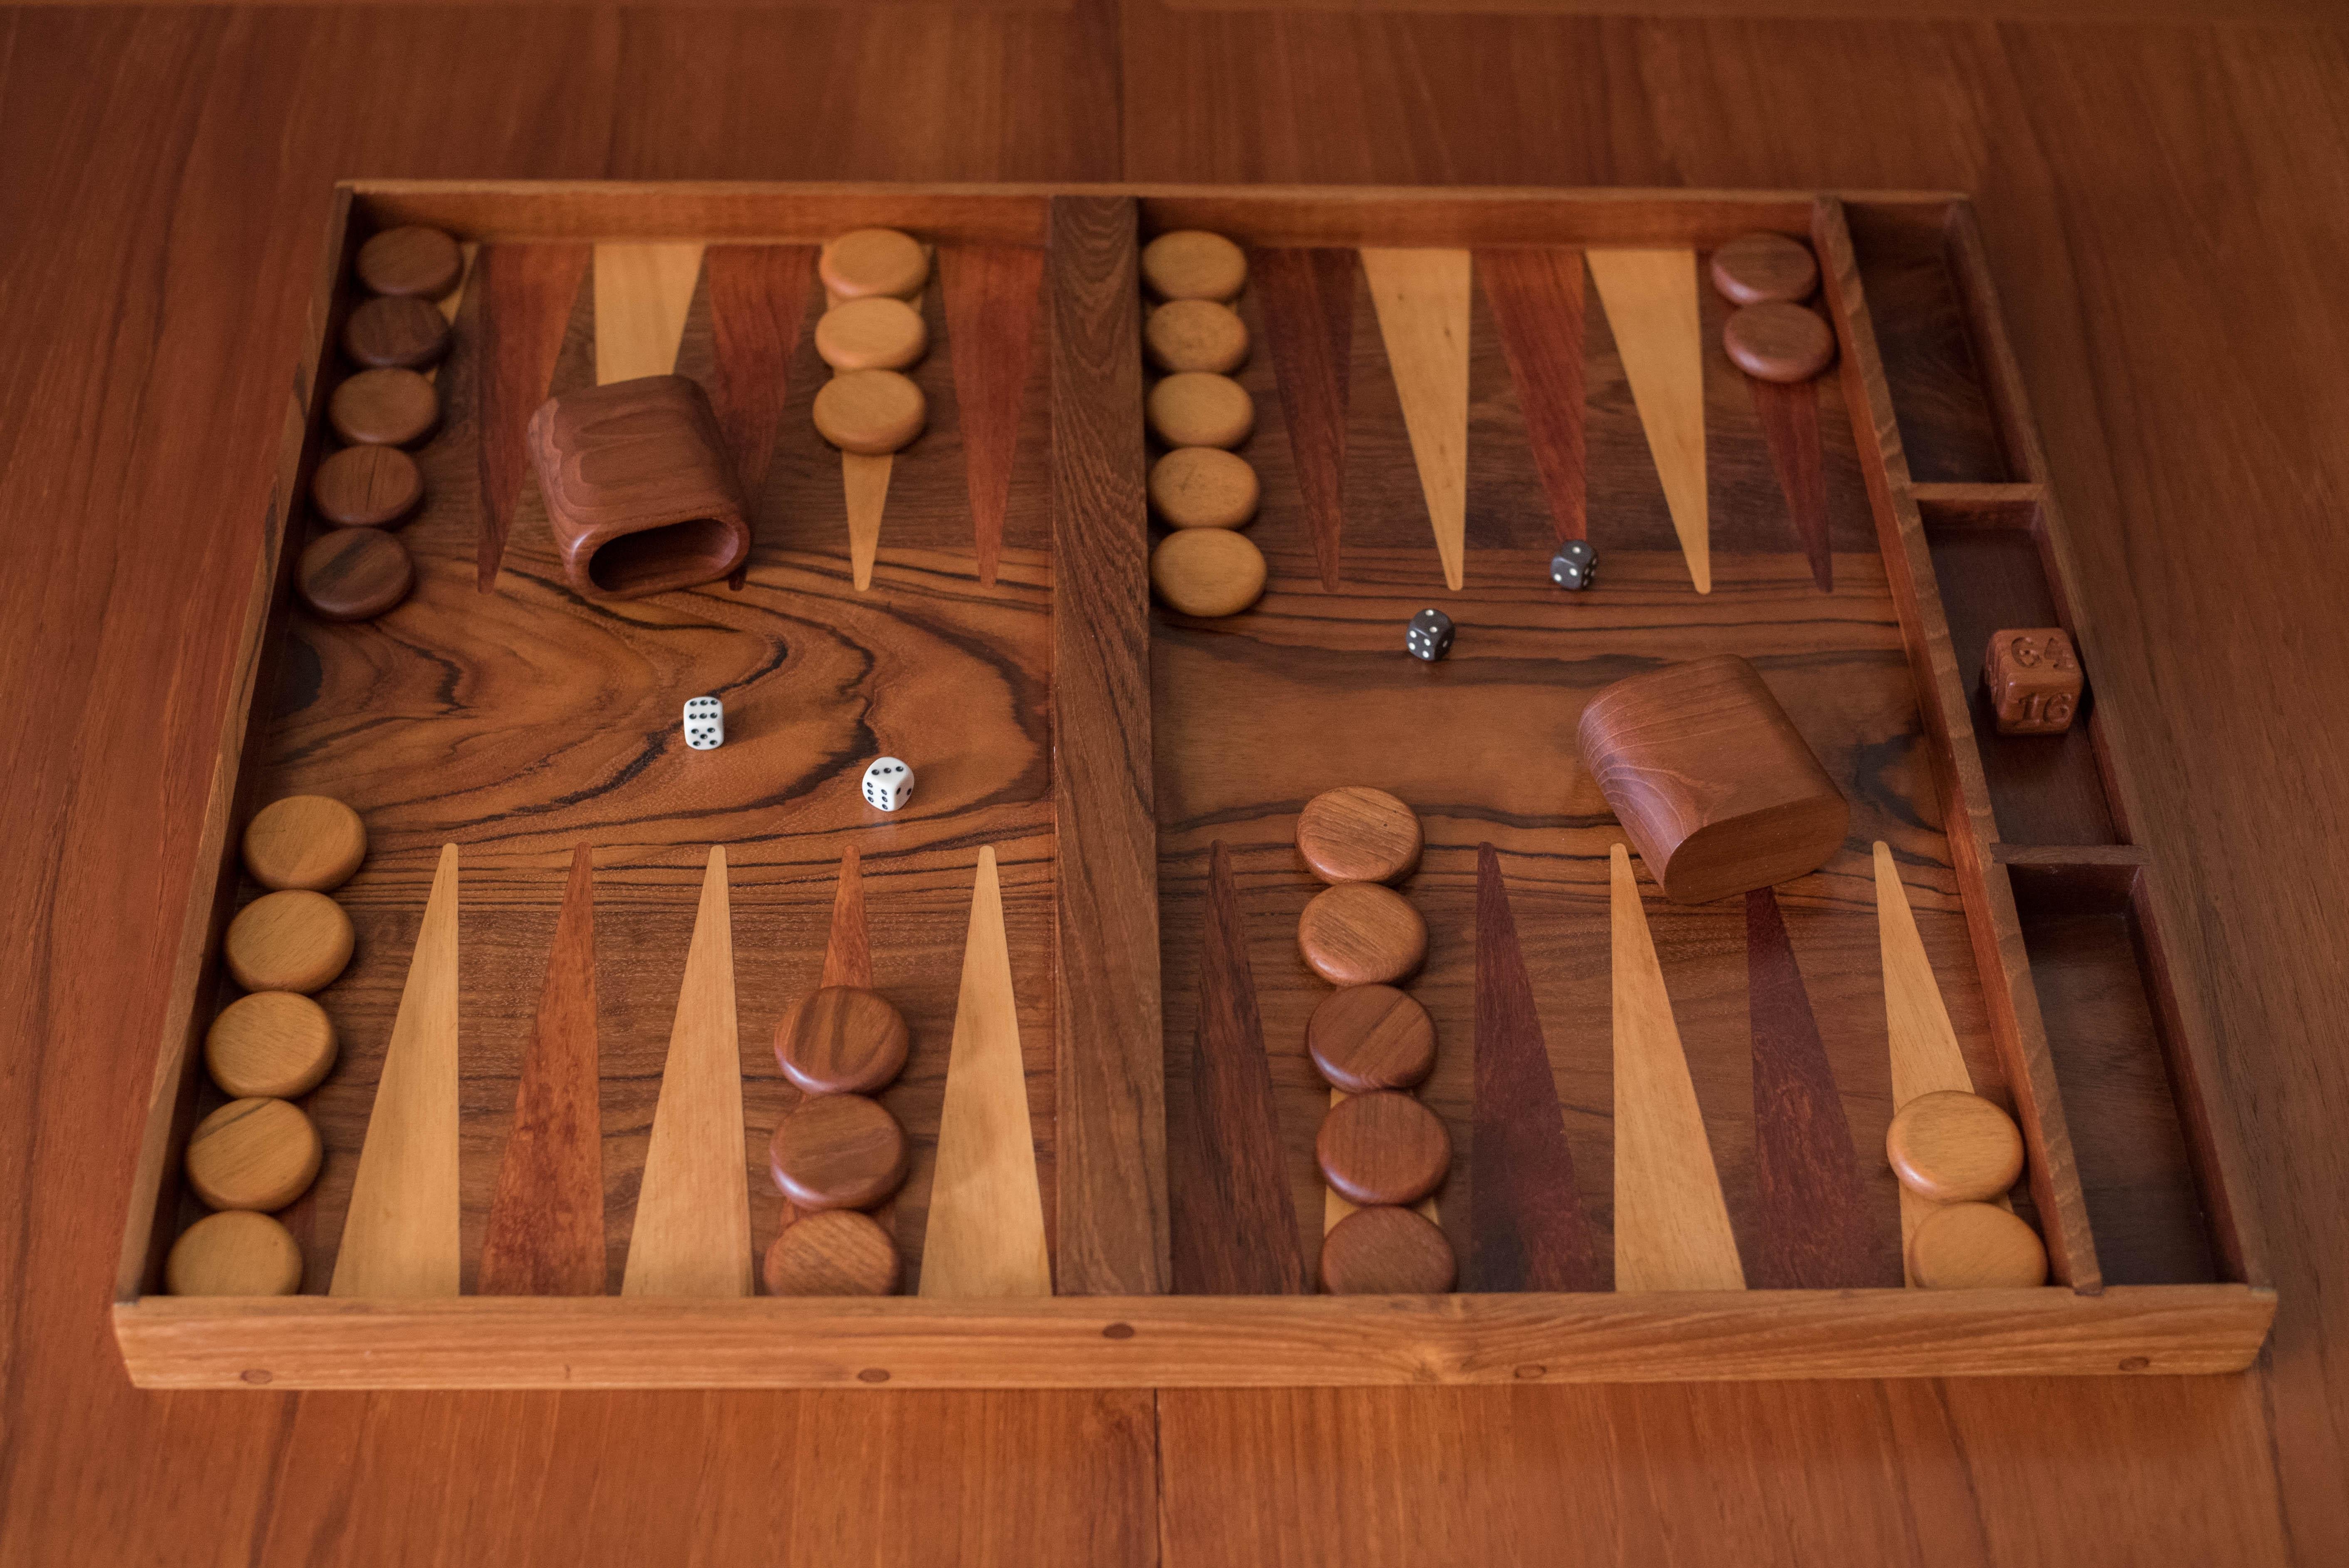 Vintage backgammon board game set circa 1970's in walnut and teak. Features a stunning contrast of rosewood and maple inlaid points. This set is complete with 2 pairs of dice, 1 teak doubling cube, 2 teak cups, and 30 checkers in teak and maple.